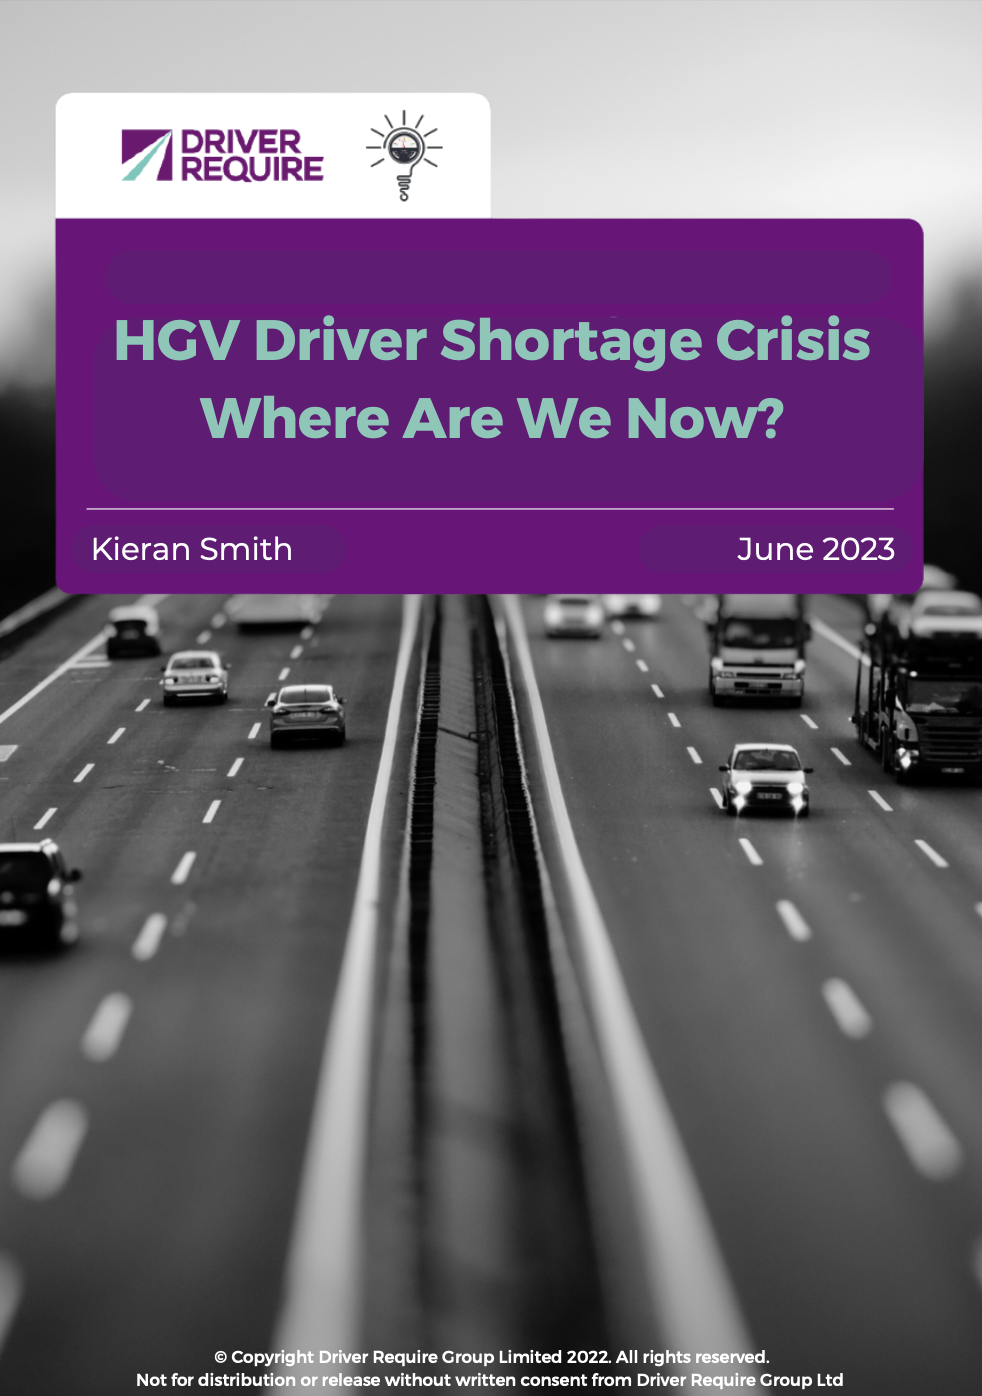 Bulletin: The HGV Driver Shortage Crisis - Where Are We Now? - Q1 2023 Analysis